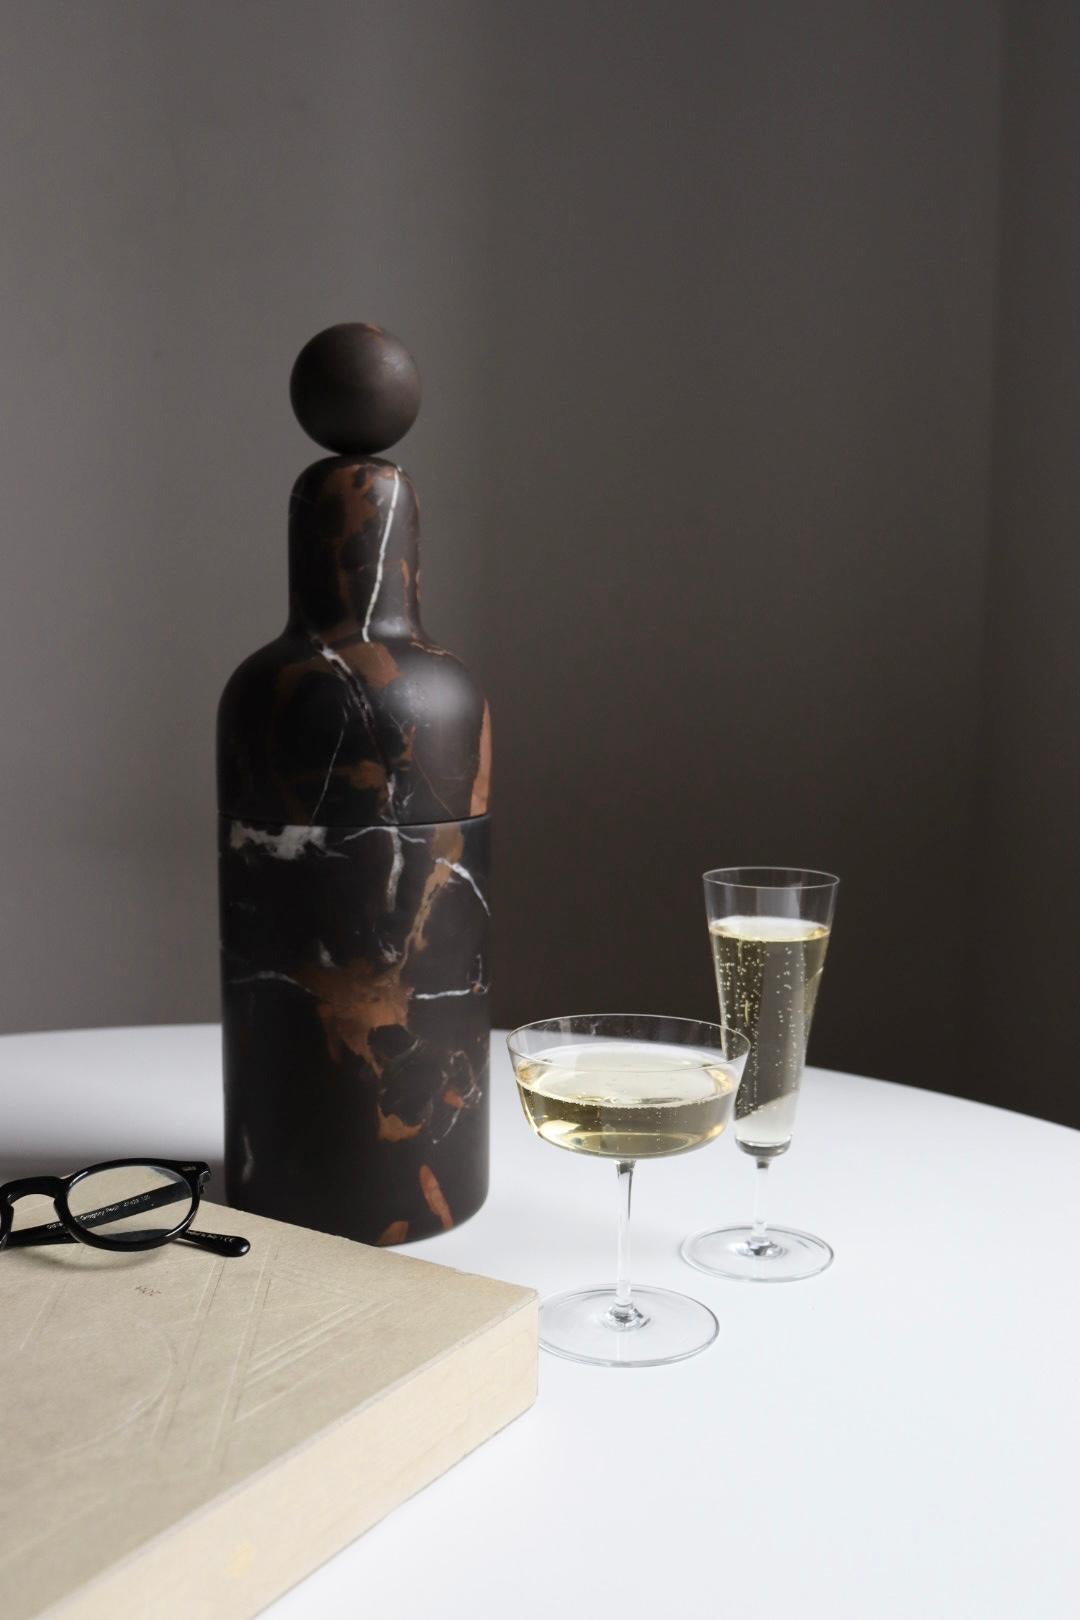 A bottle cooler that preserves the temperature of the bottle in the most natural way, avoiding the use of ice.
Made in Black and Gold marble, with a brass glass inside.
It is conceived to host all standard sizes of both wine and champagne